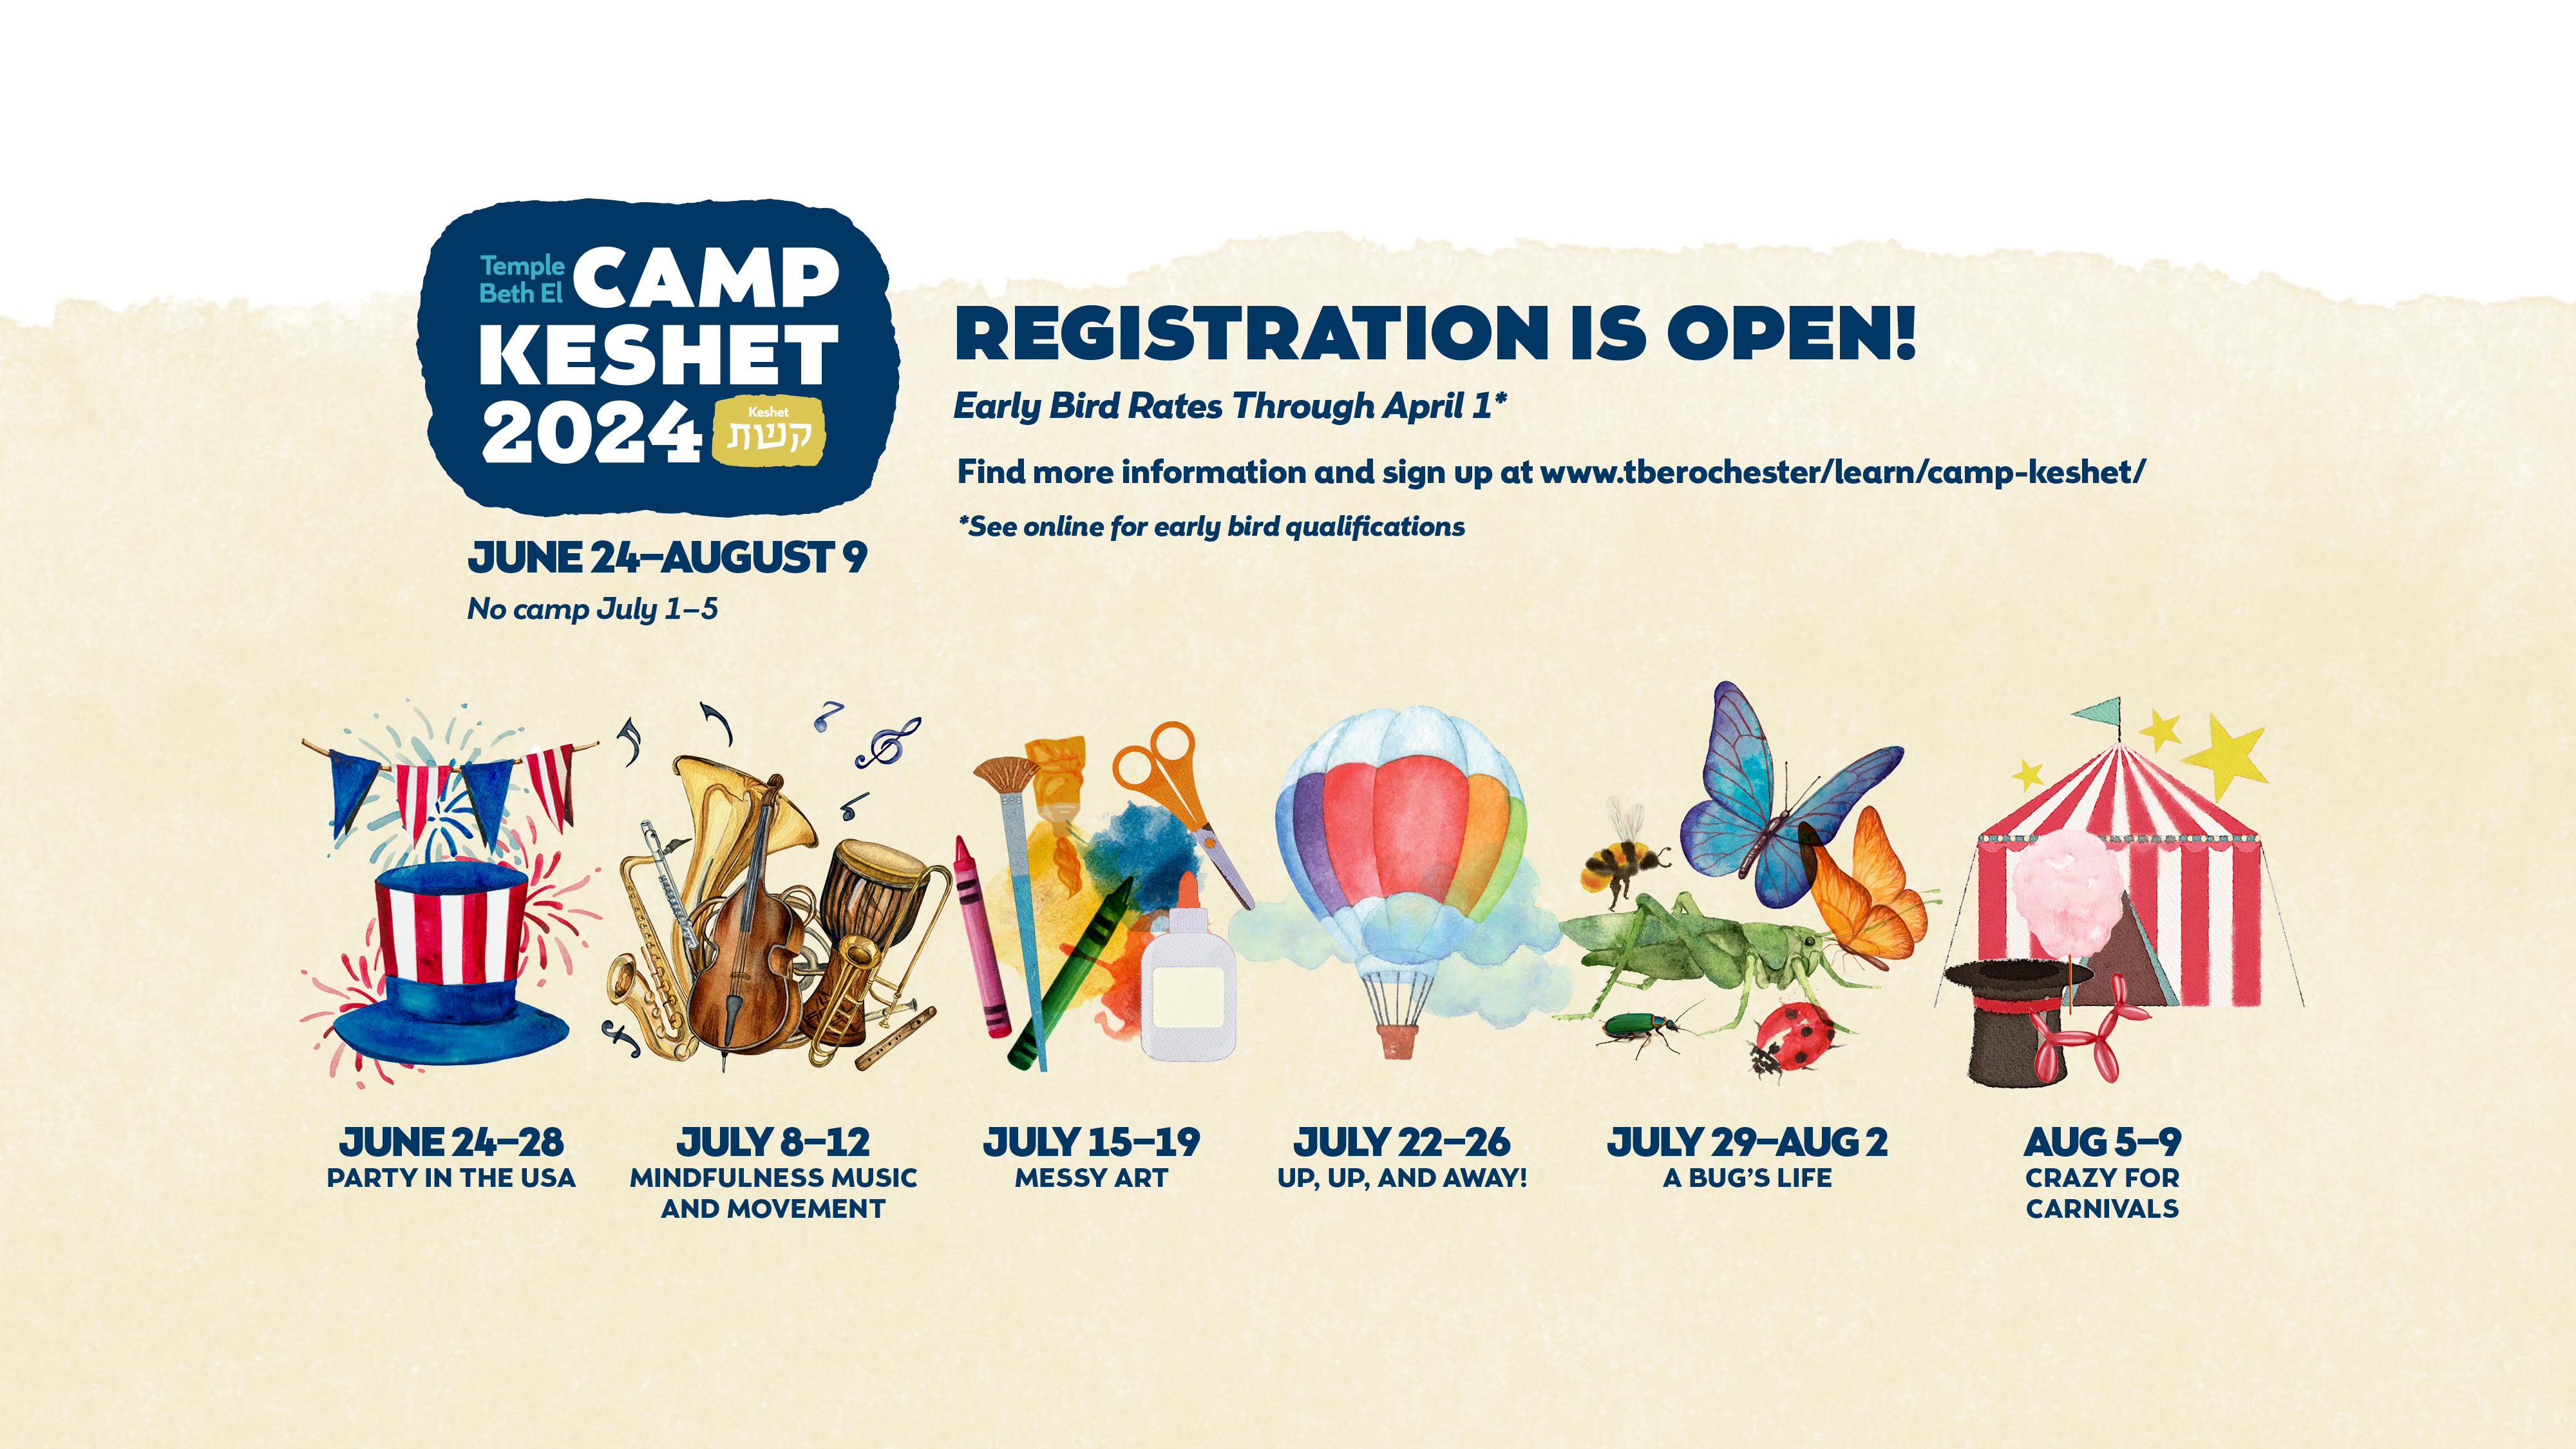 Dates for Camp Keshet 2024, including themes.